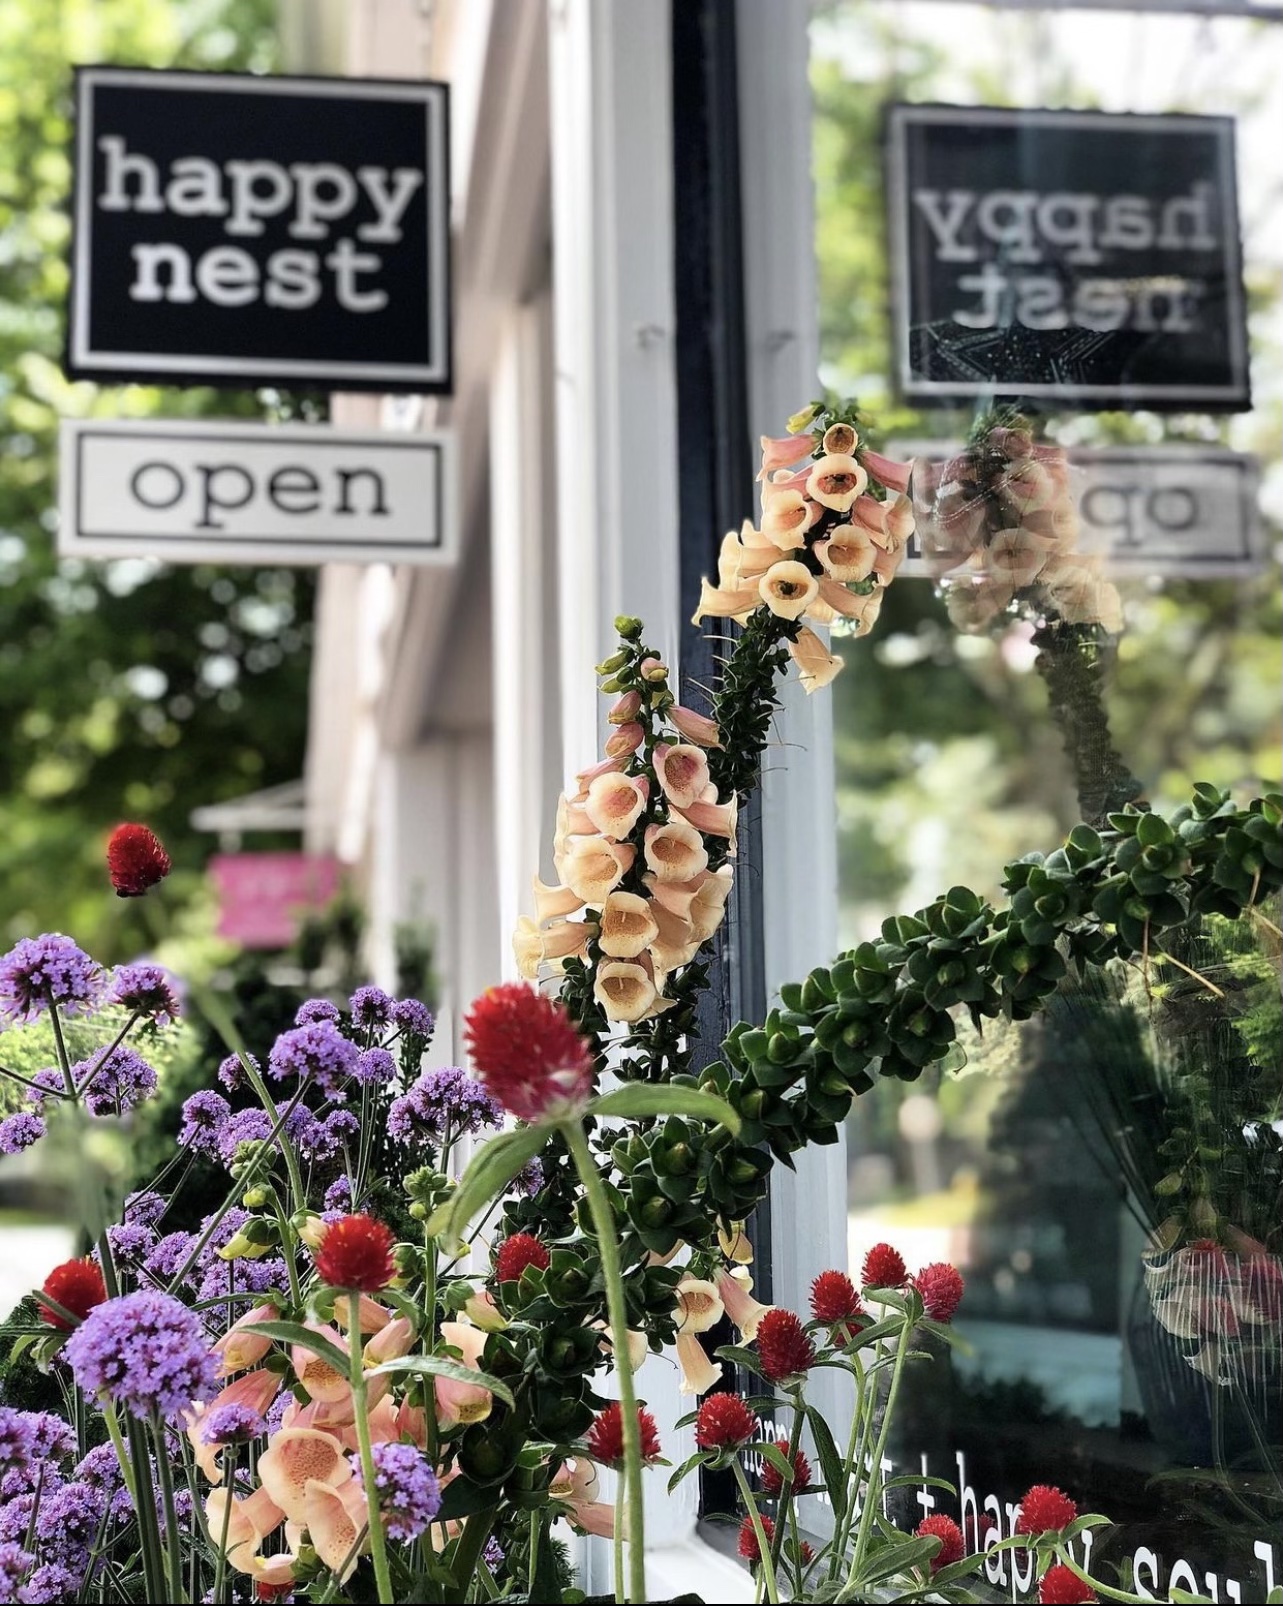 happynest open sign with flowers